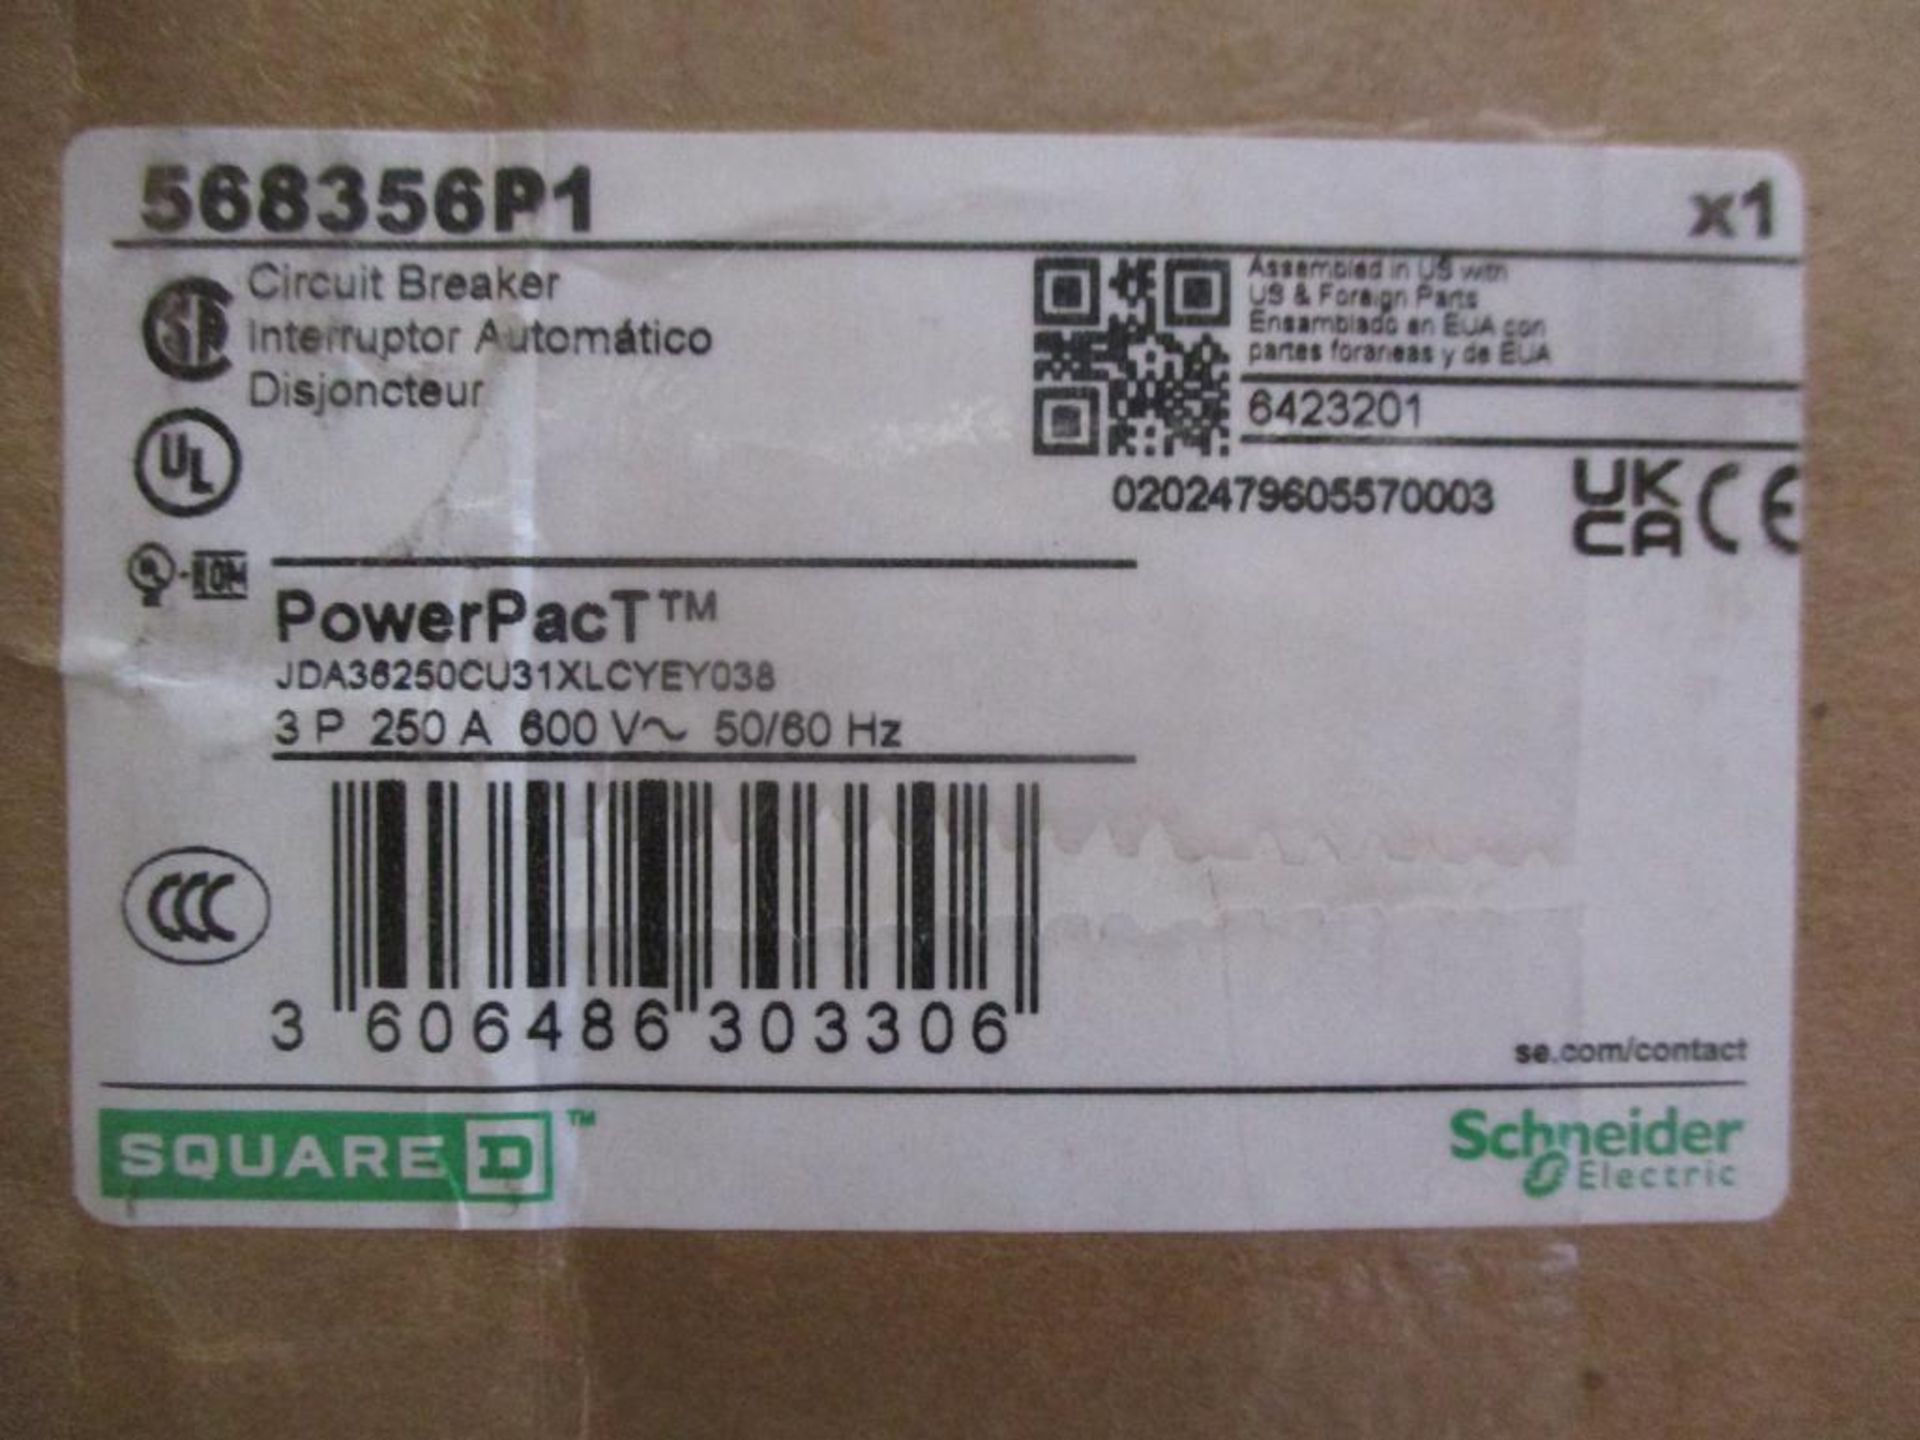 Square D 250 AMP Circuit Breaker, 568356P1, 3P, 250A, 600VAC, PawerPacT (New in Box) - Image 4 of 4